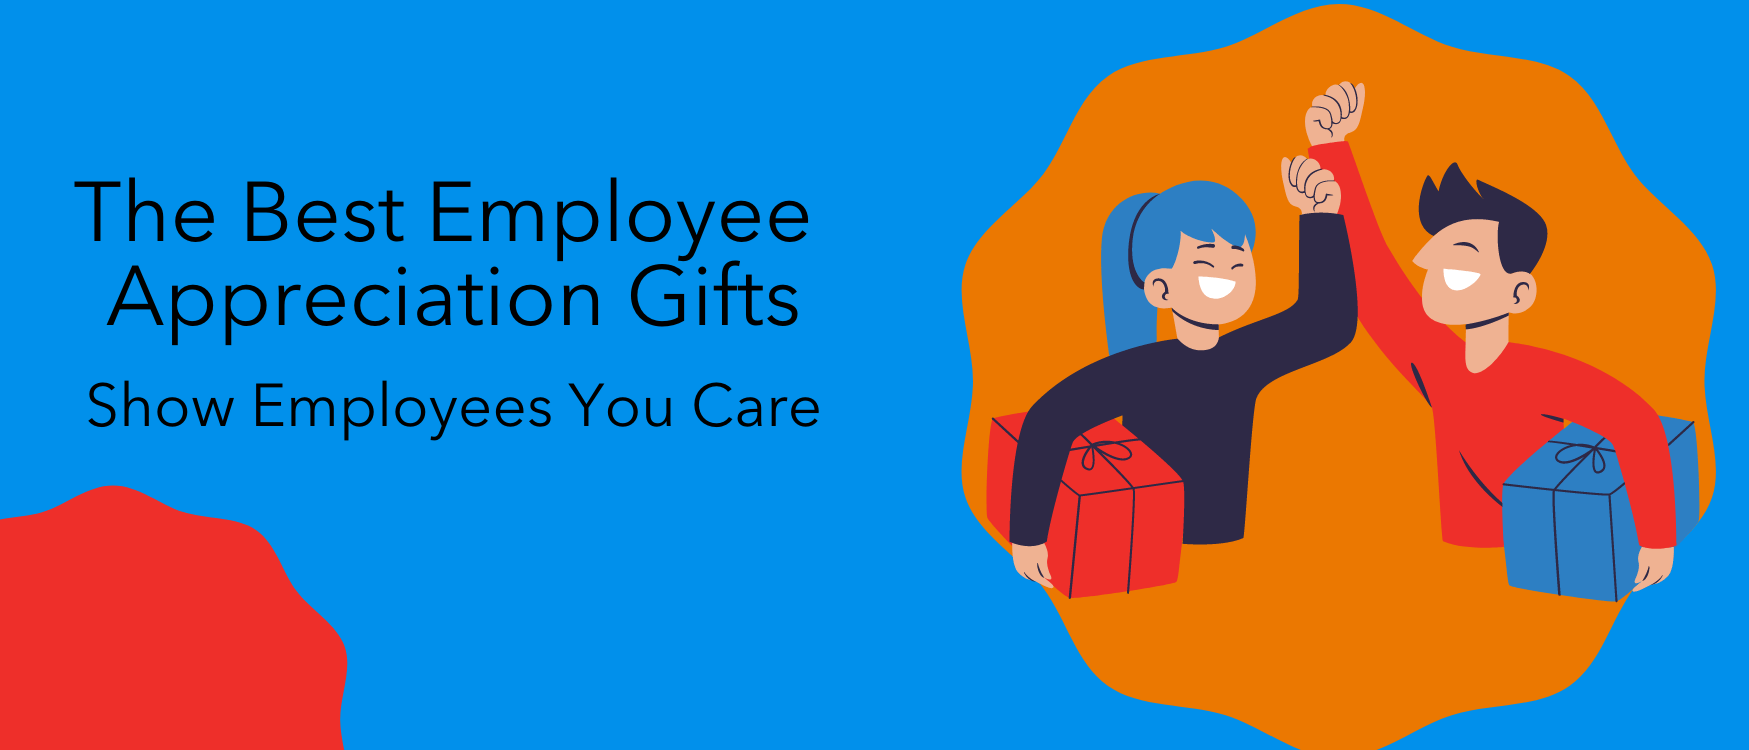 Grab the best Diwali gifts for employees under 5000